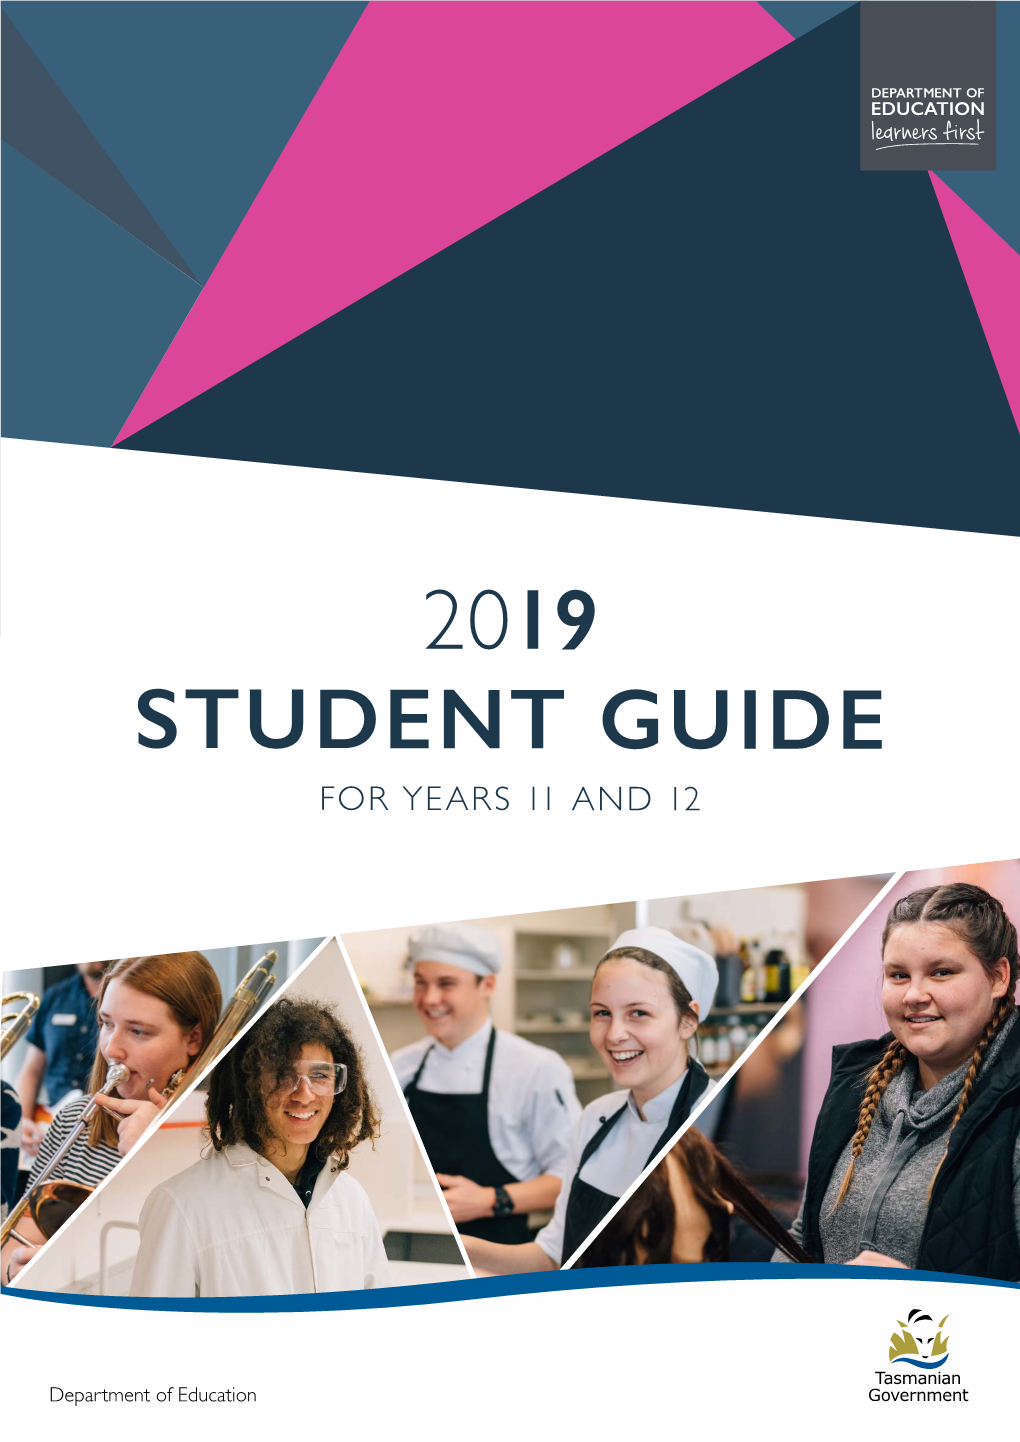 2019 Student Guide for Years 11 and 12